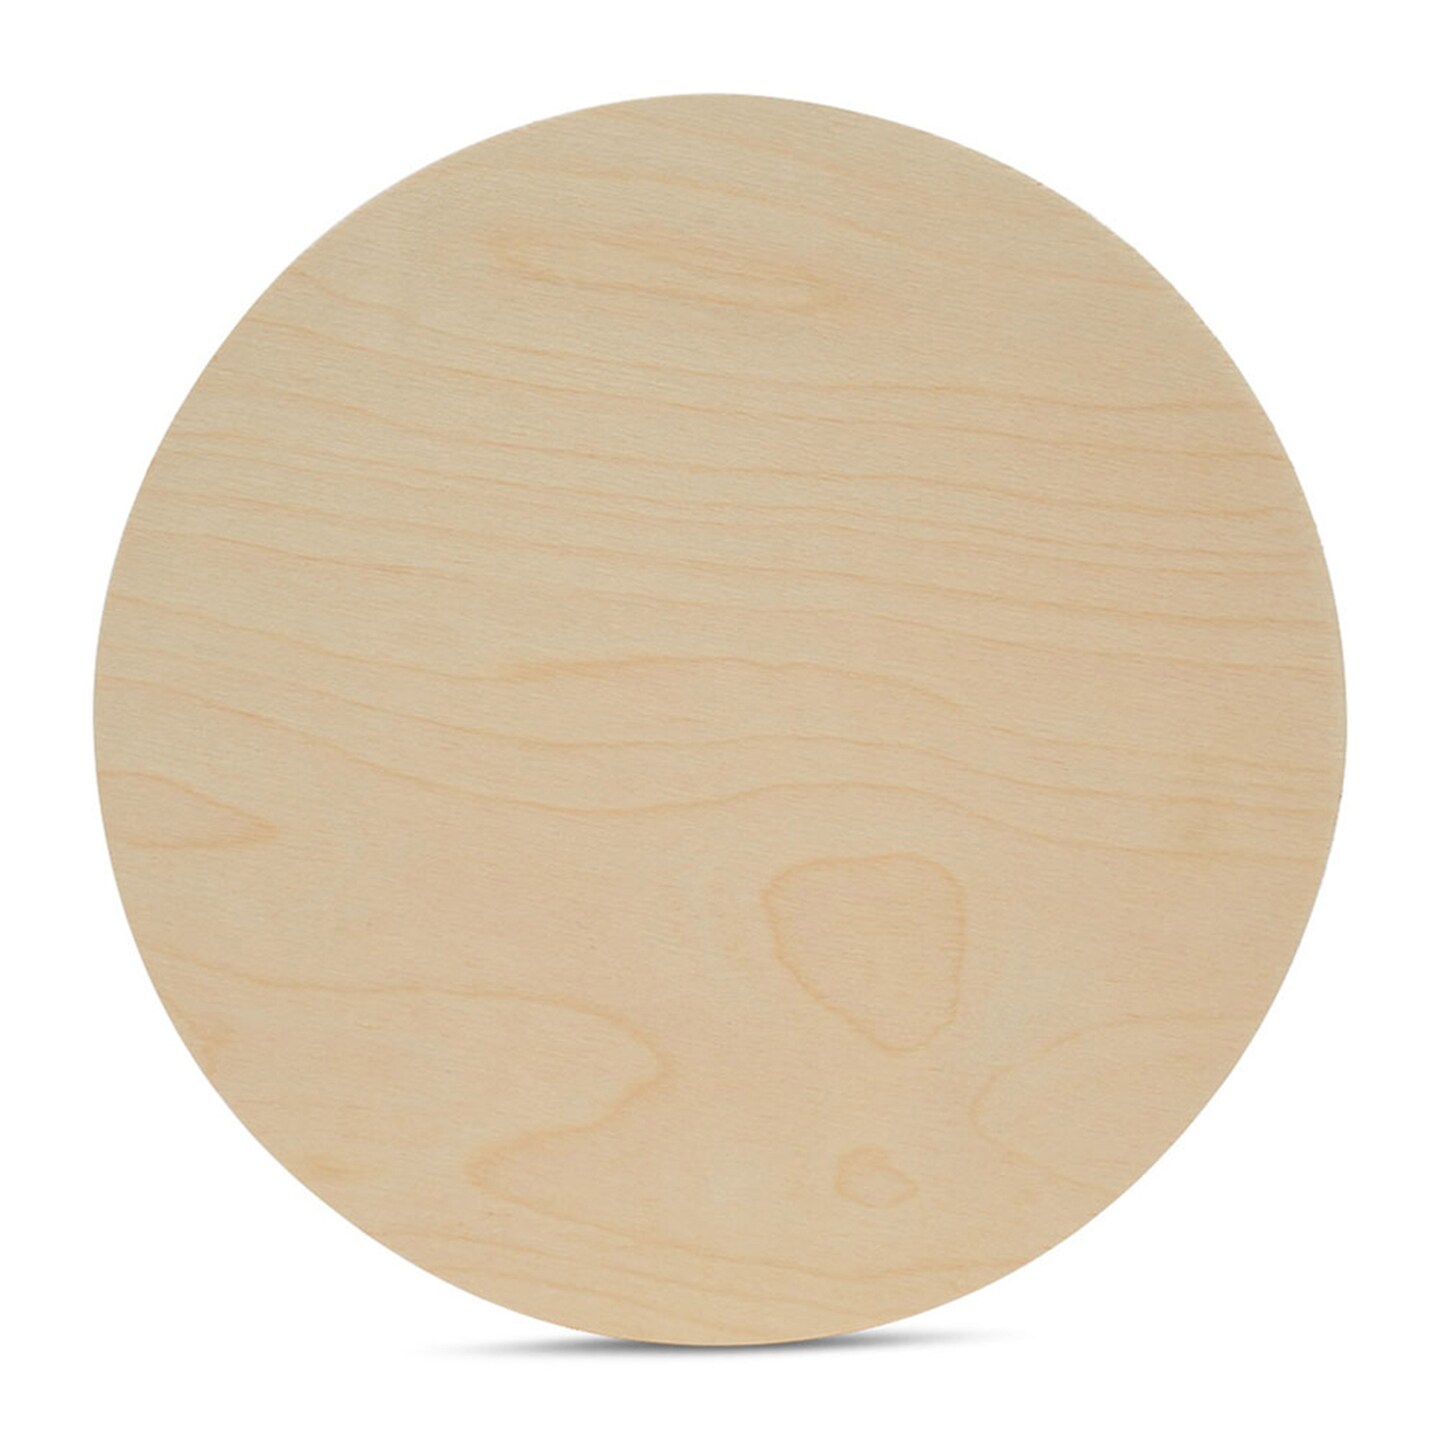 Unfinished Wooden Circles 12 inch, Pack of 1 Round Wood Plaques Unfinished  Wood Circles for Crafts Charcuterie Board by Woodpeckers